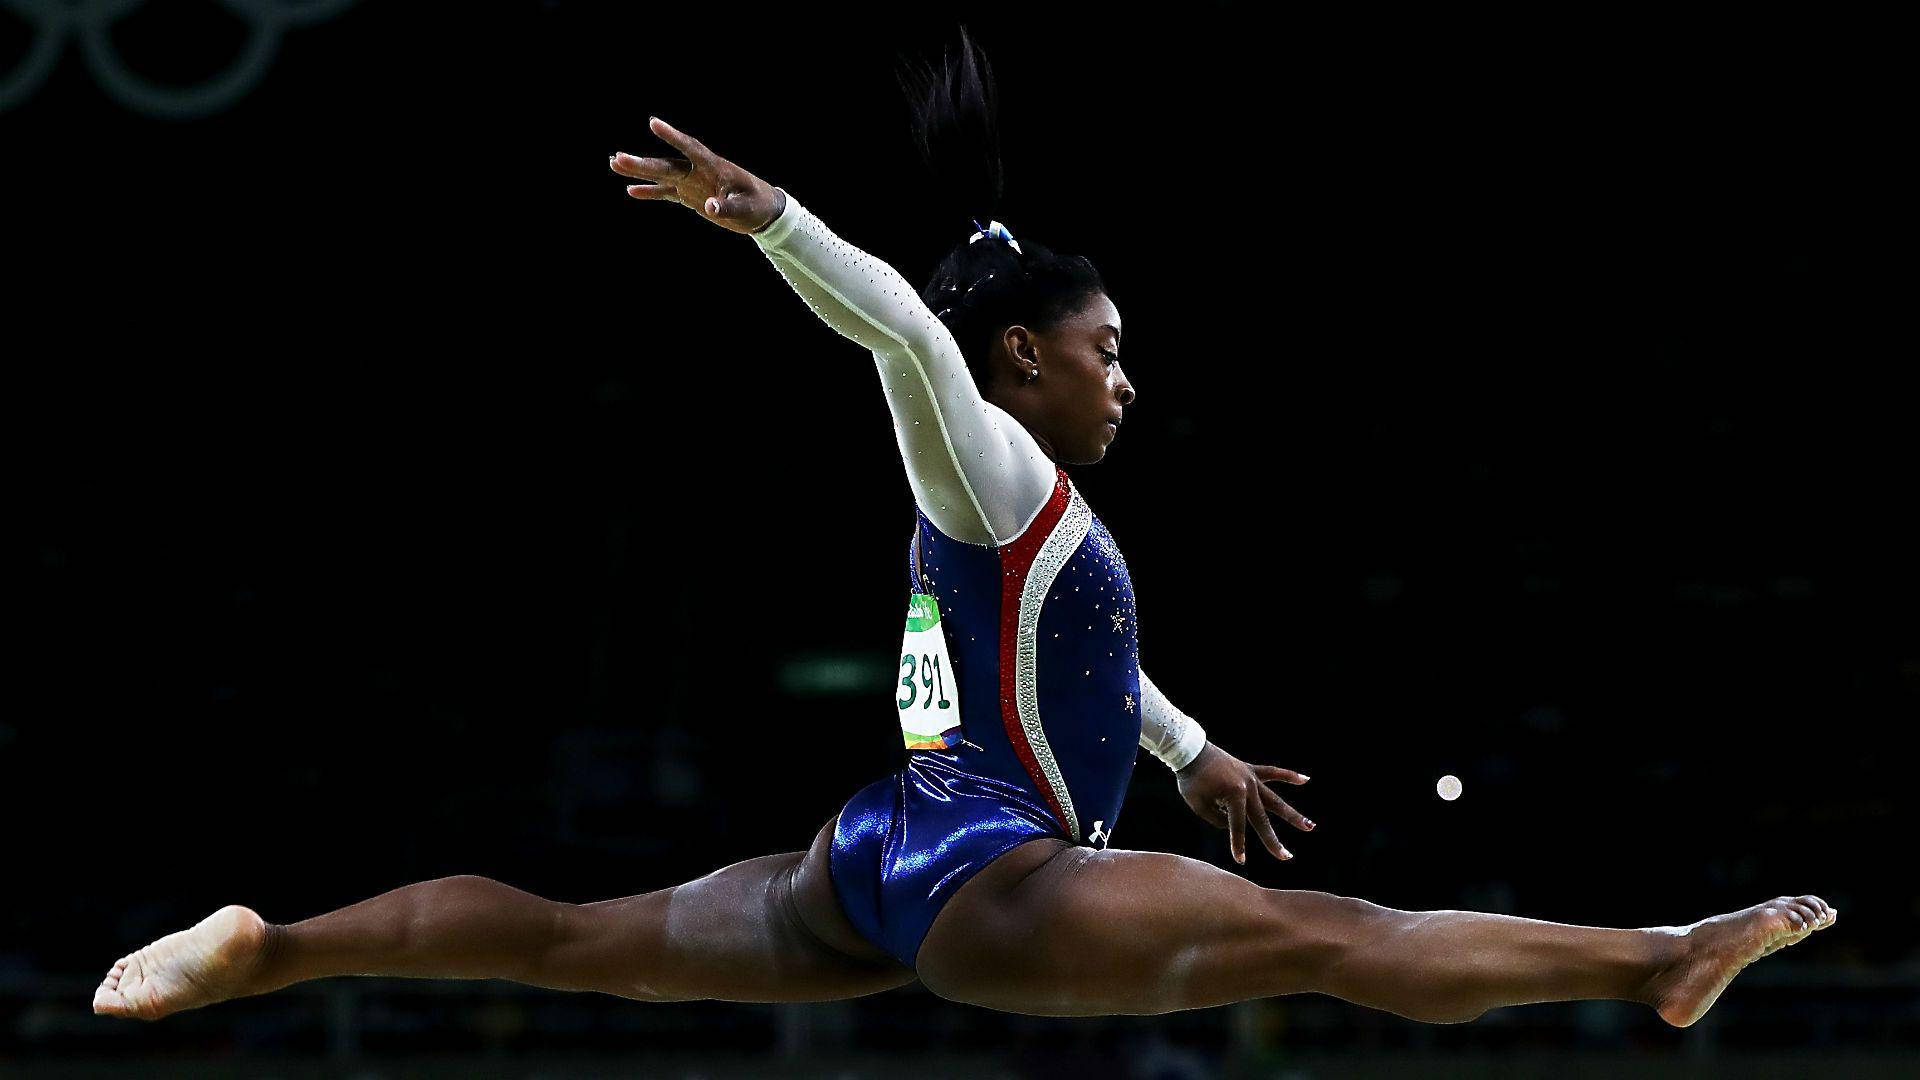 4-time Olympic Gold Medalist Simone Biles Performs On The Balance Beam Wallpaper